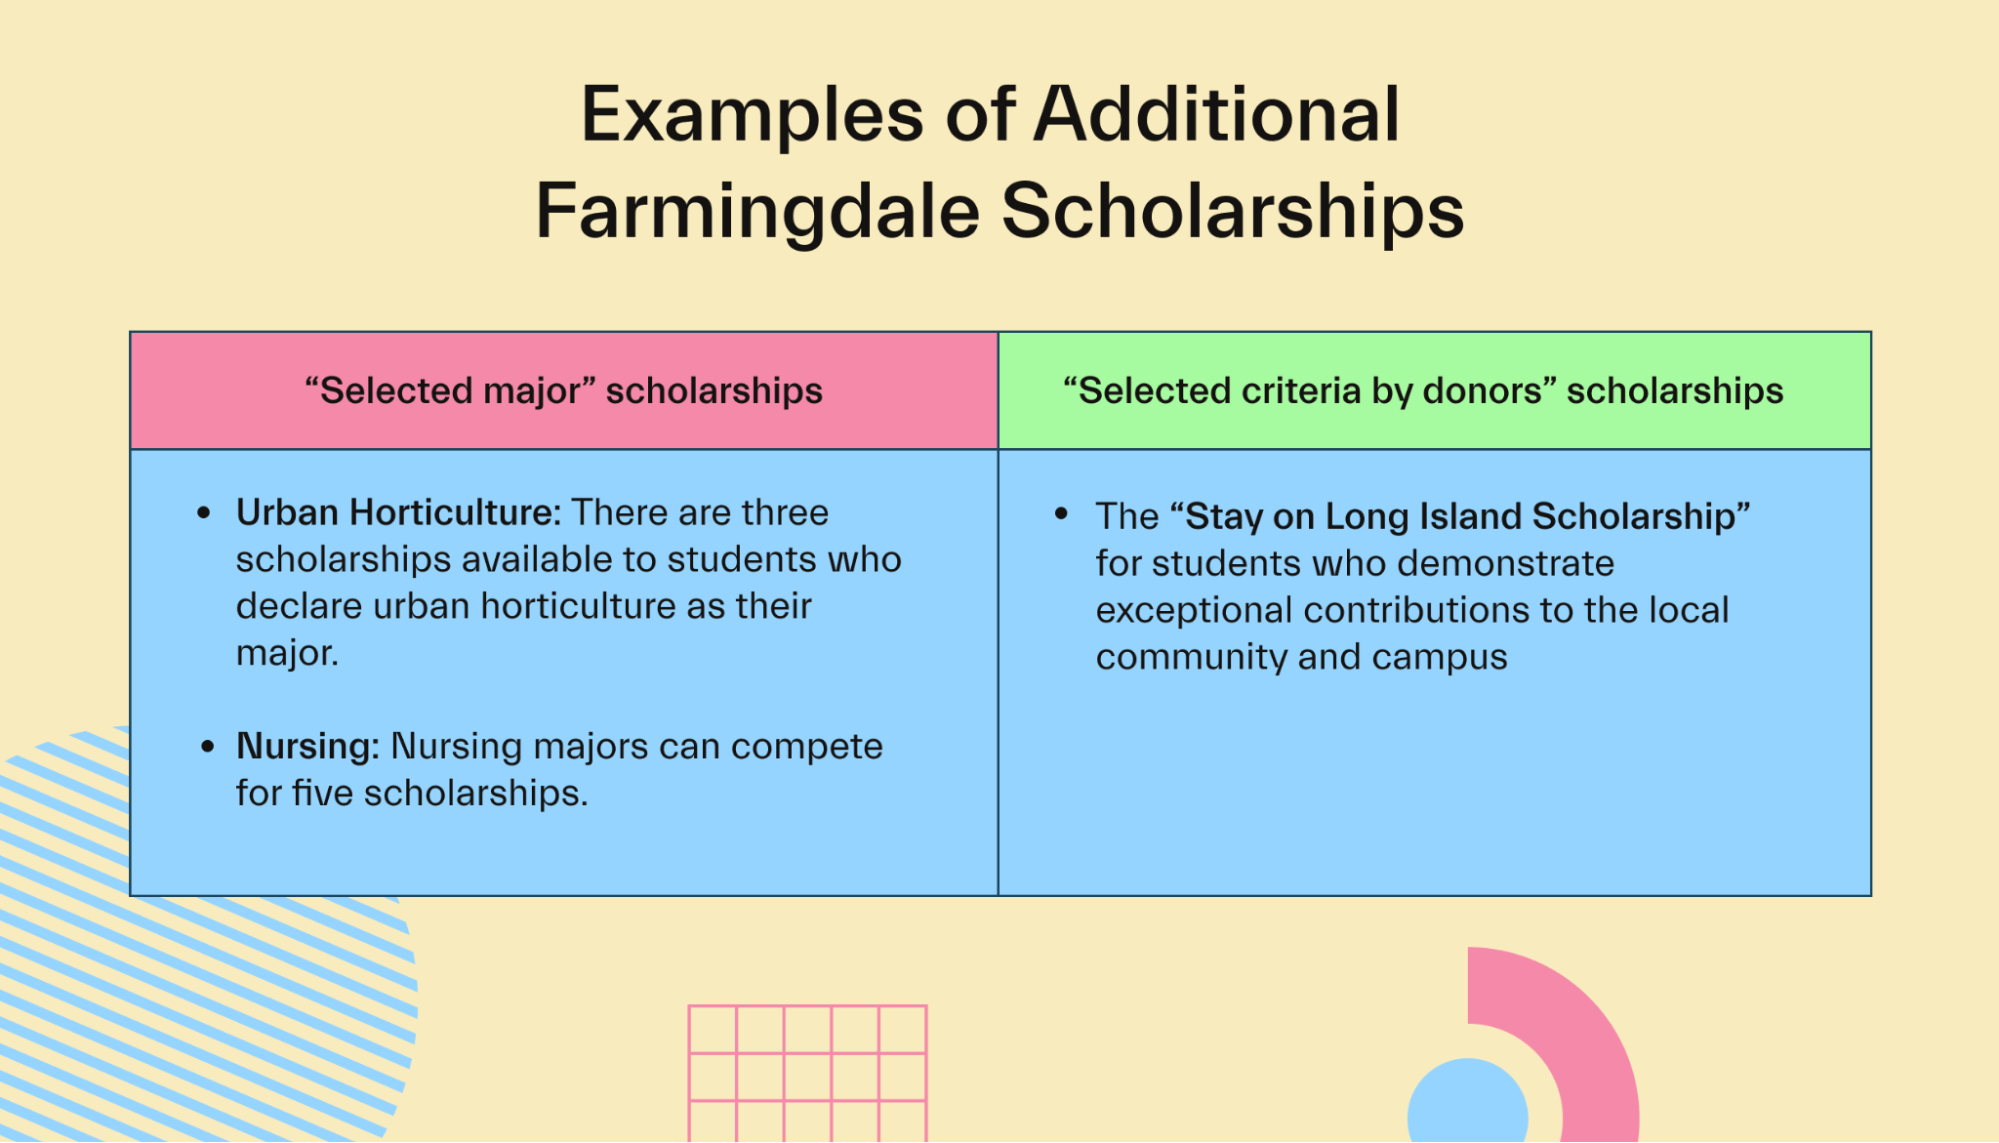 Examples of Additional Farmingdale Scholarships